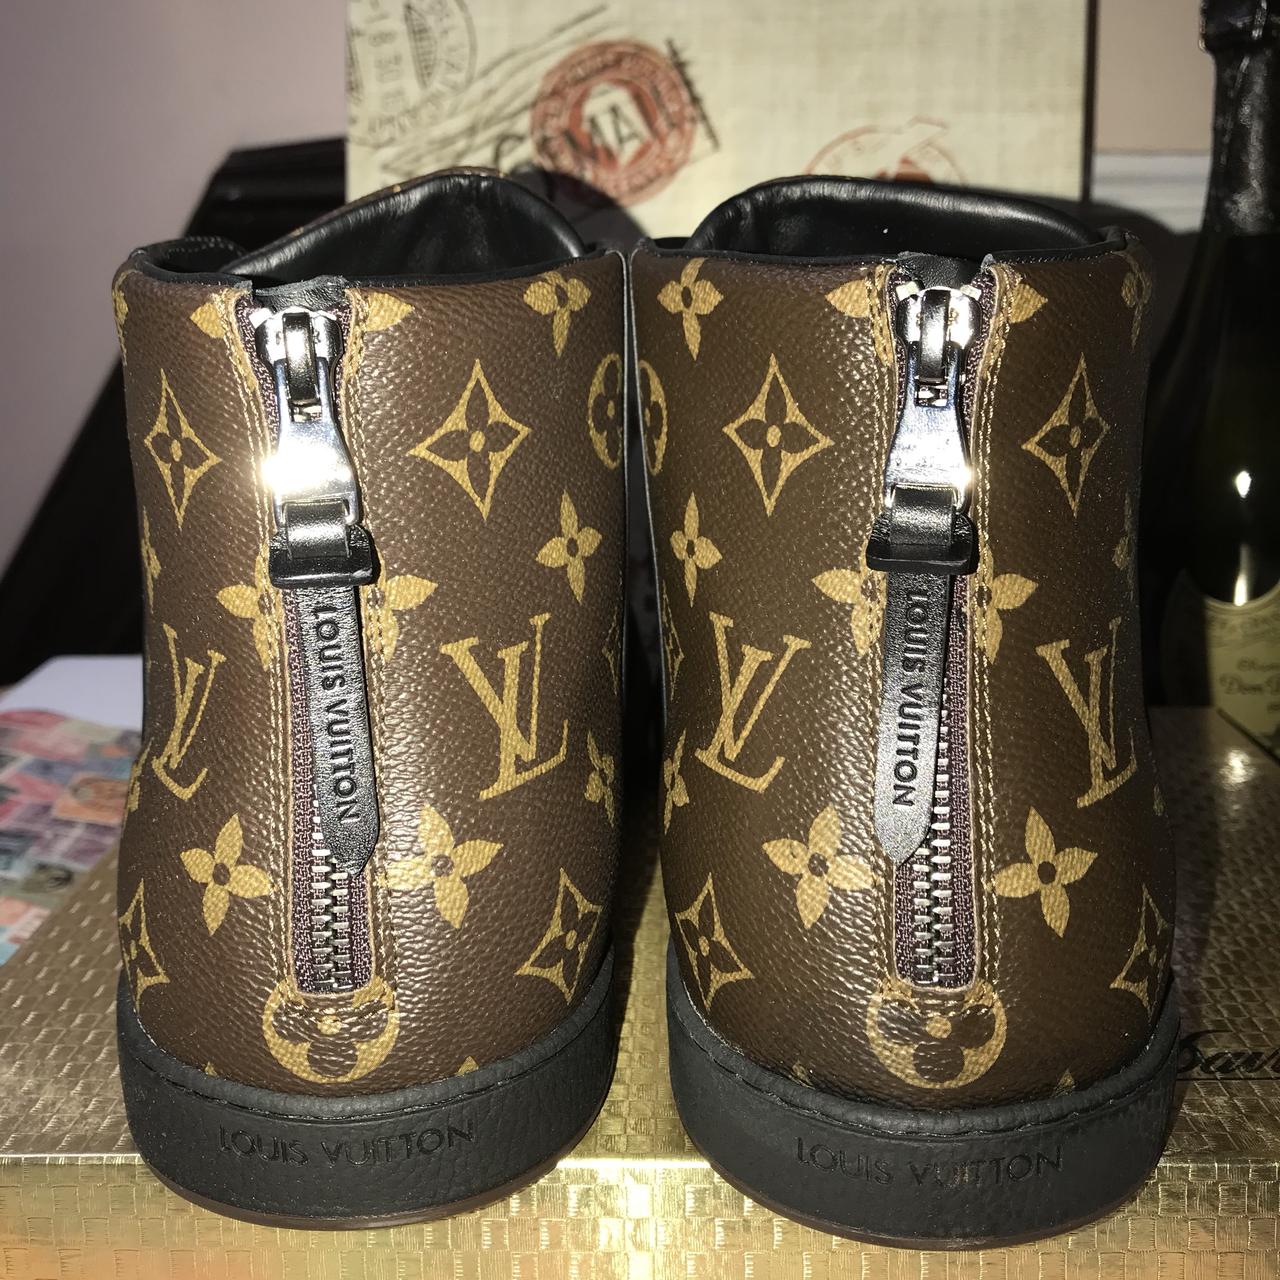 I want to so badly get a pair of Louis Vuitton men's shoes…. But